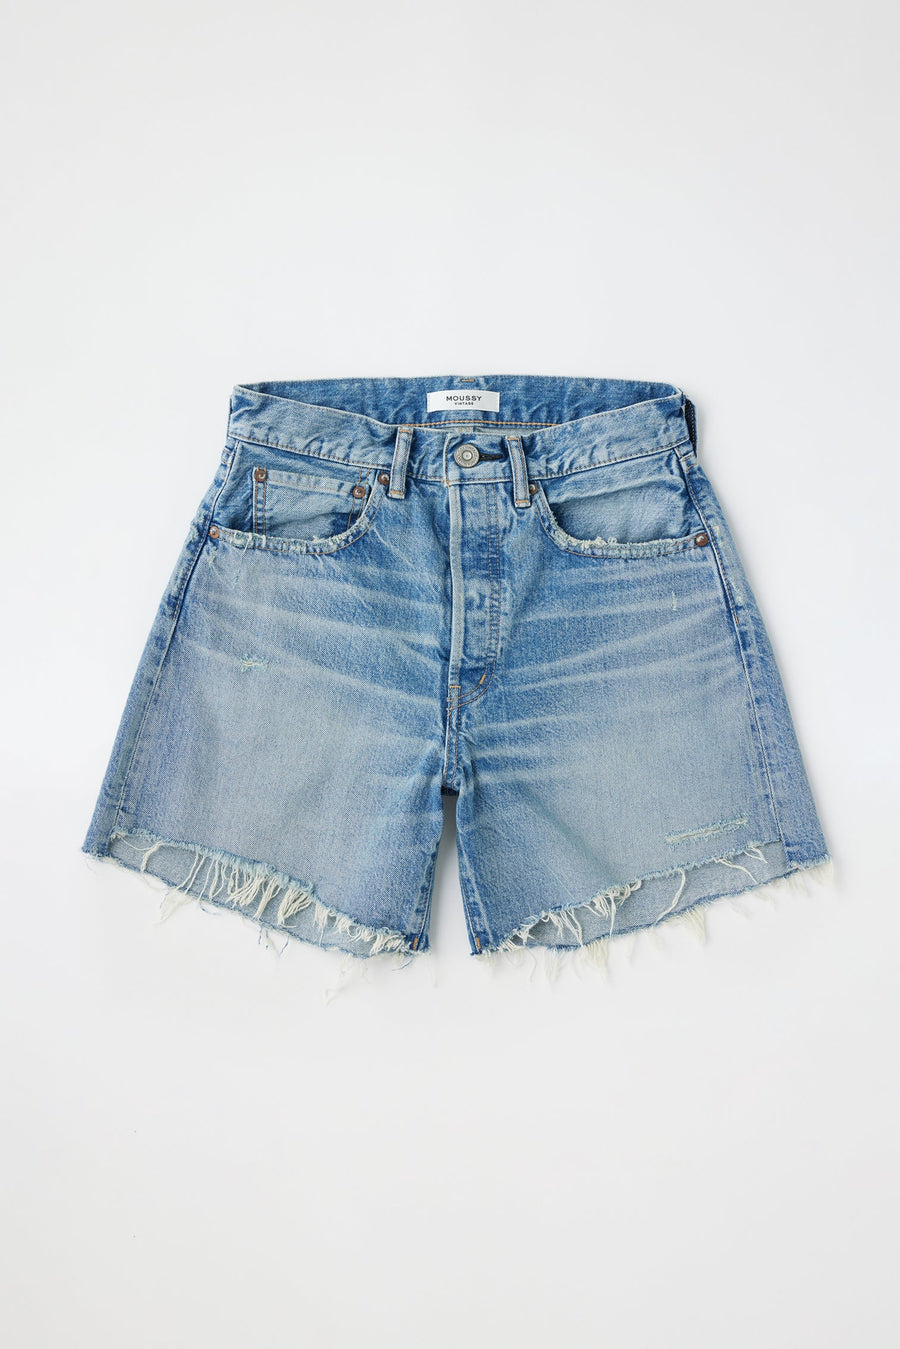 Graterford Shorts - Blue